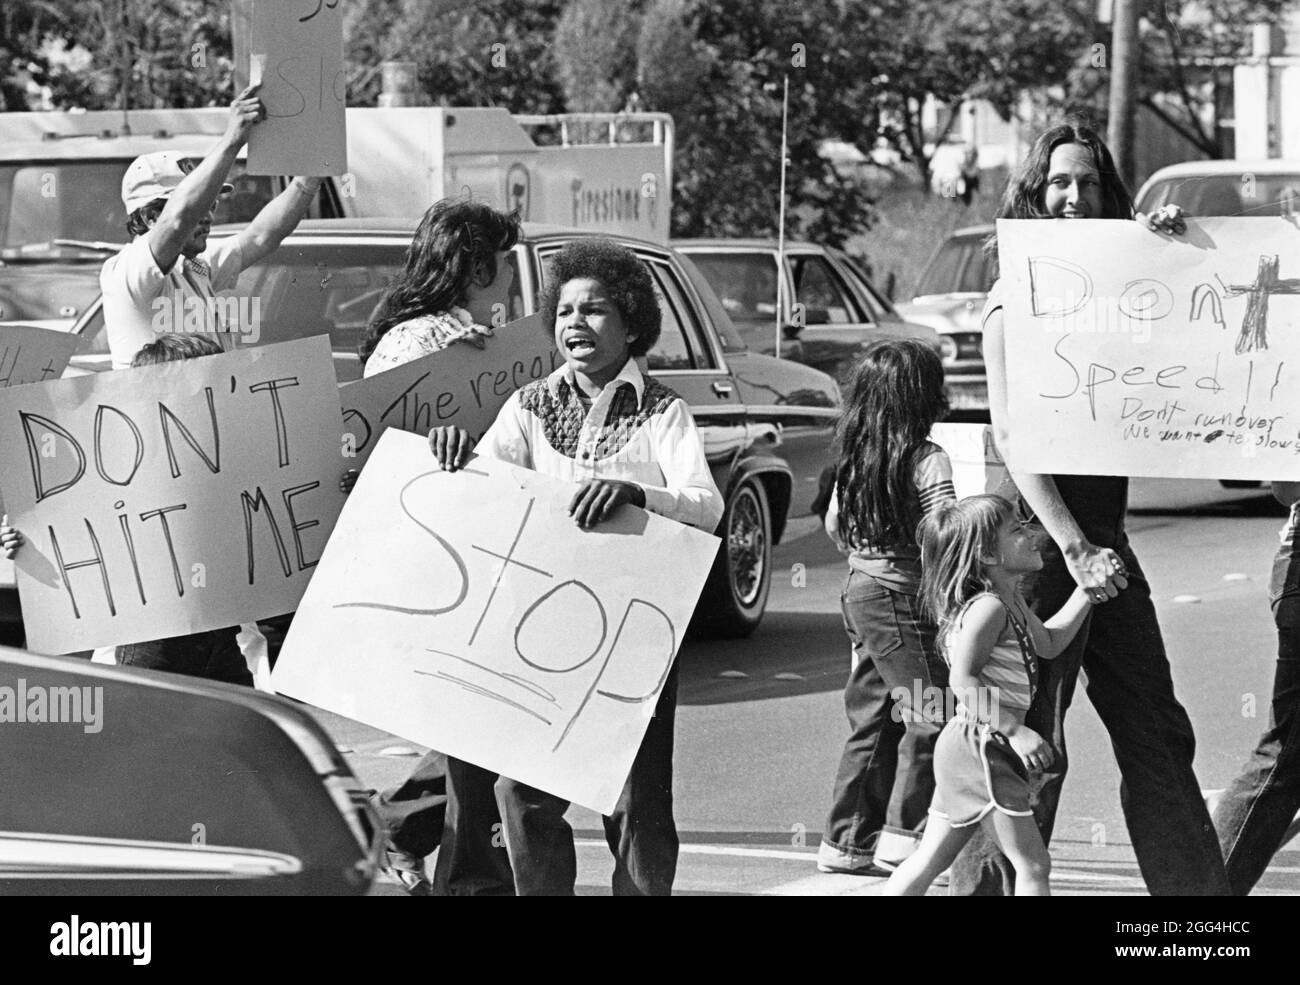 © 1990: Residents walk through traffic with hand-made signs protesting lack of traffic signals in their neighborhood that lead to cars driving too fast. Stock Photo